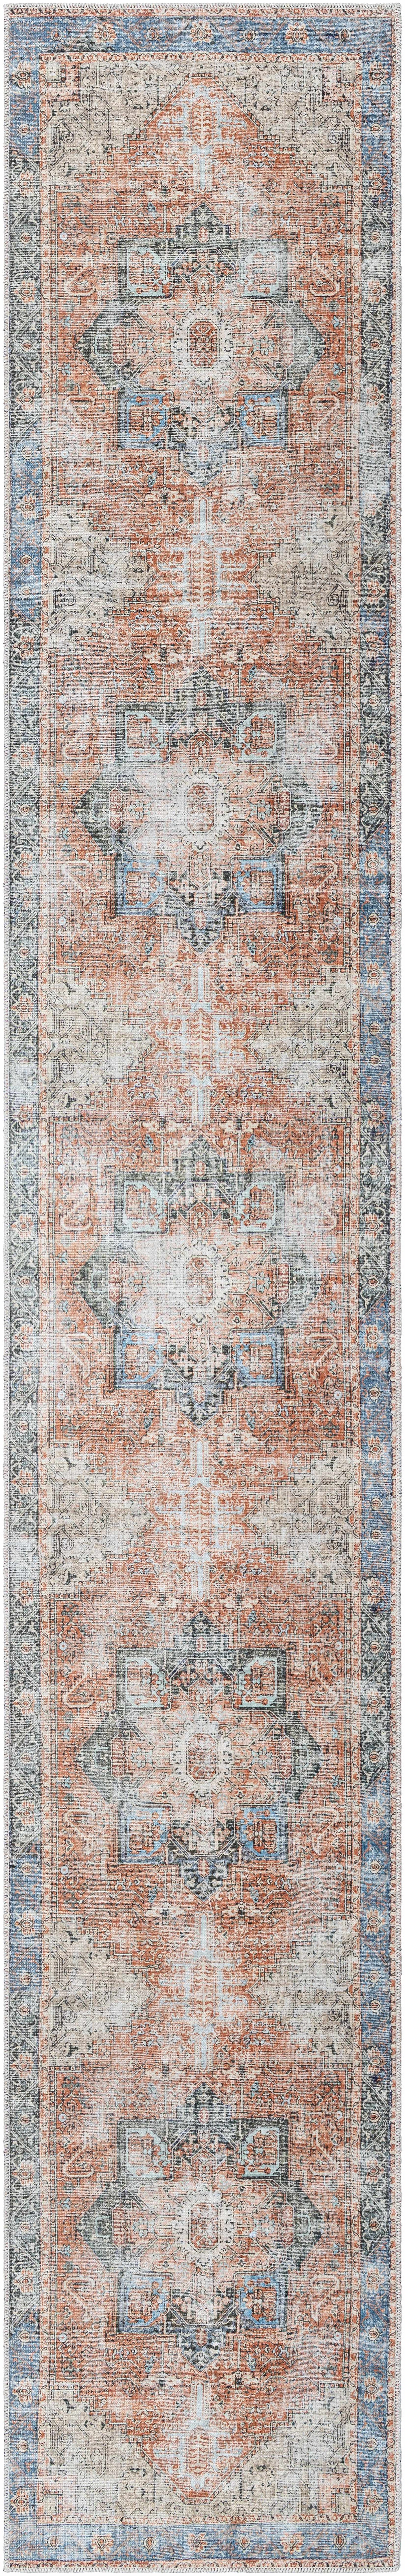 Boutique Rugs Rugs Rosman Distressed Washable Rug